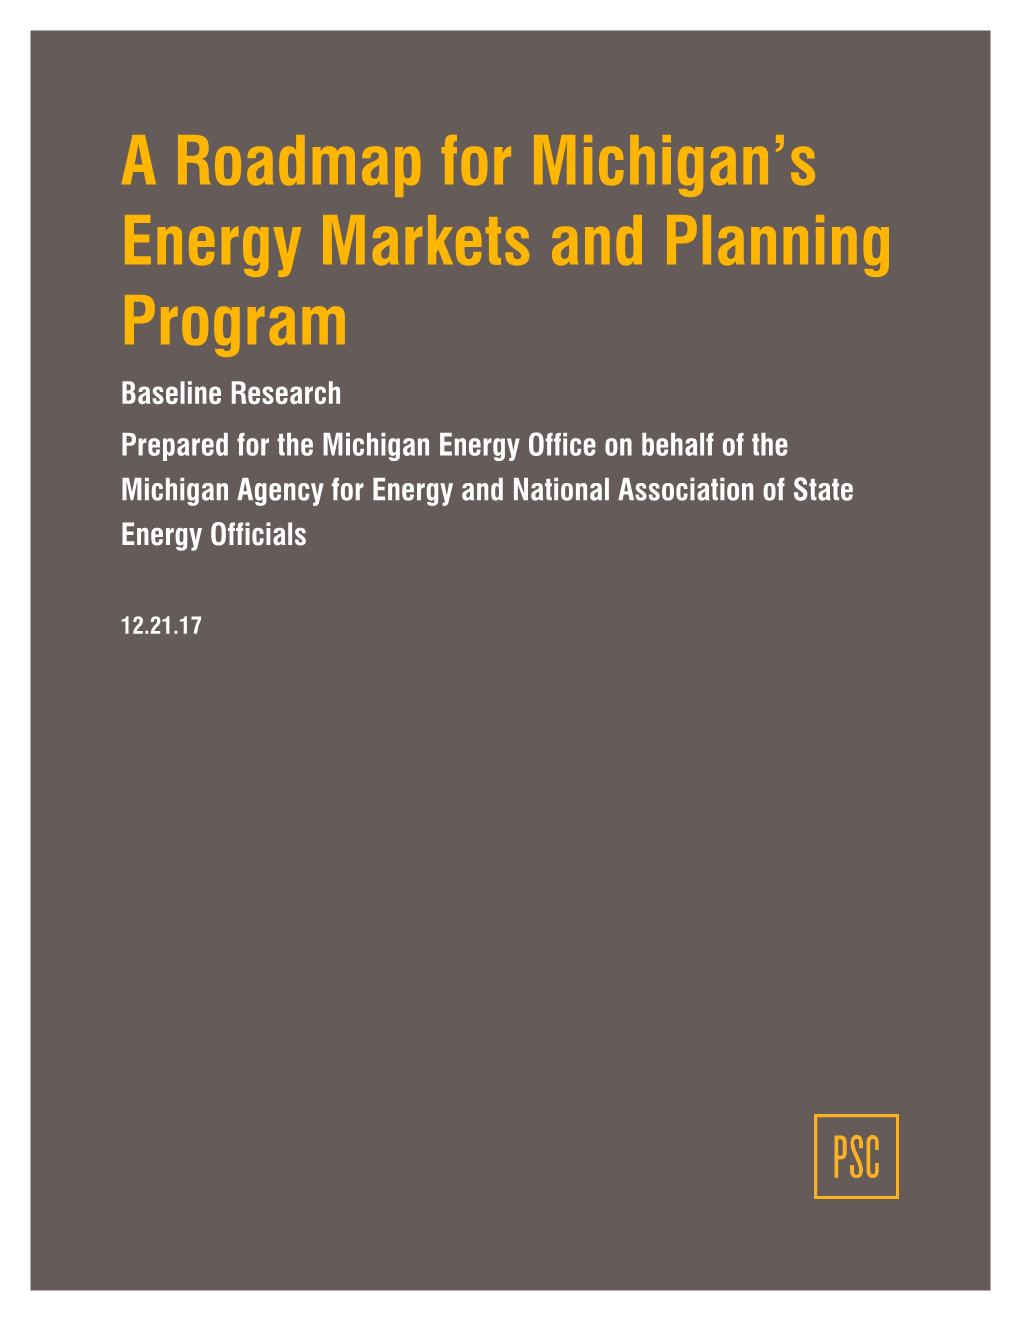 A Roadmap for Michigan's Energy Markets and Planning Program